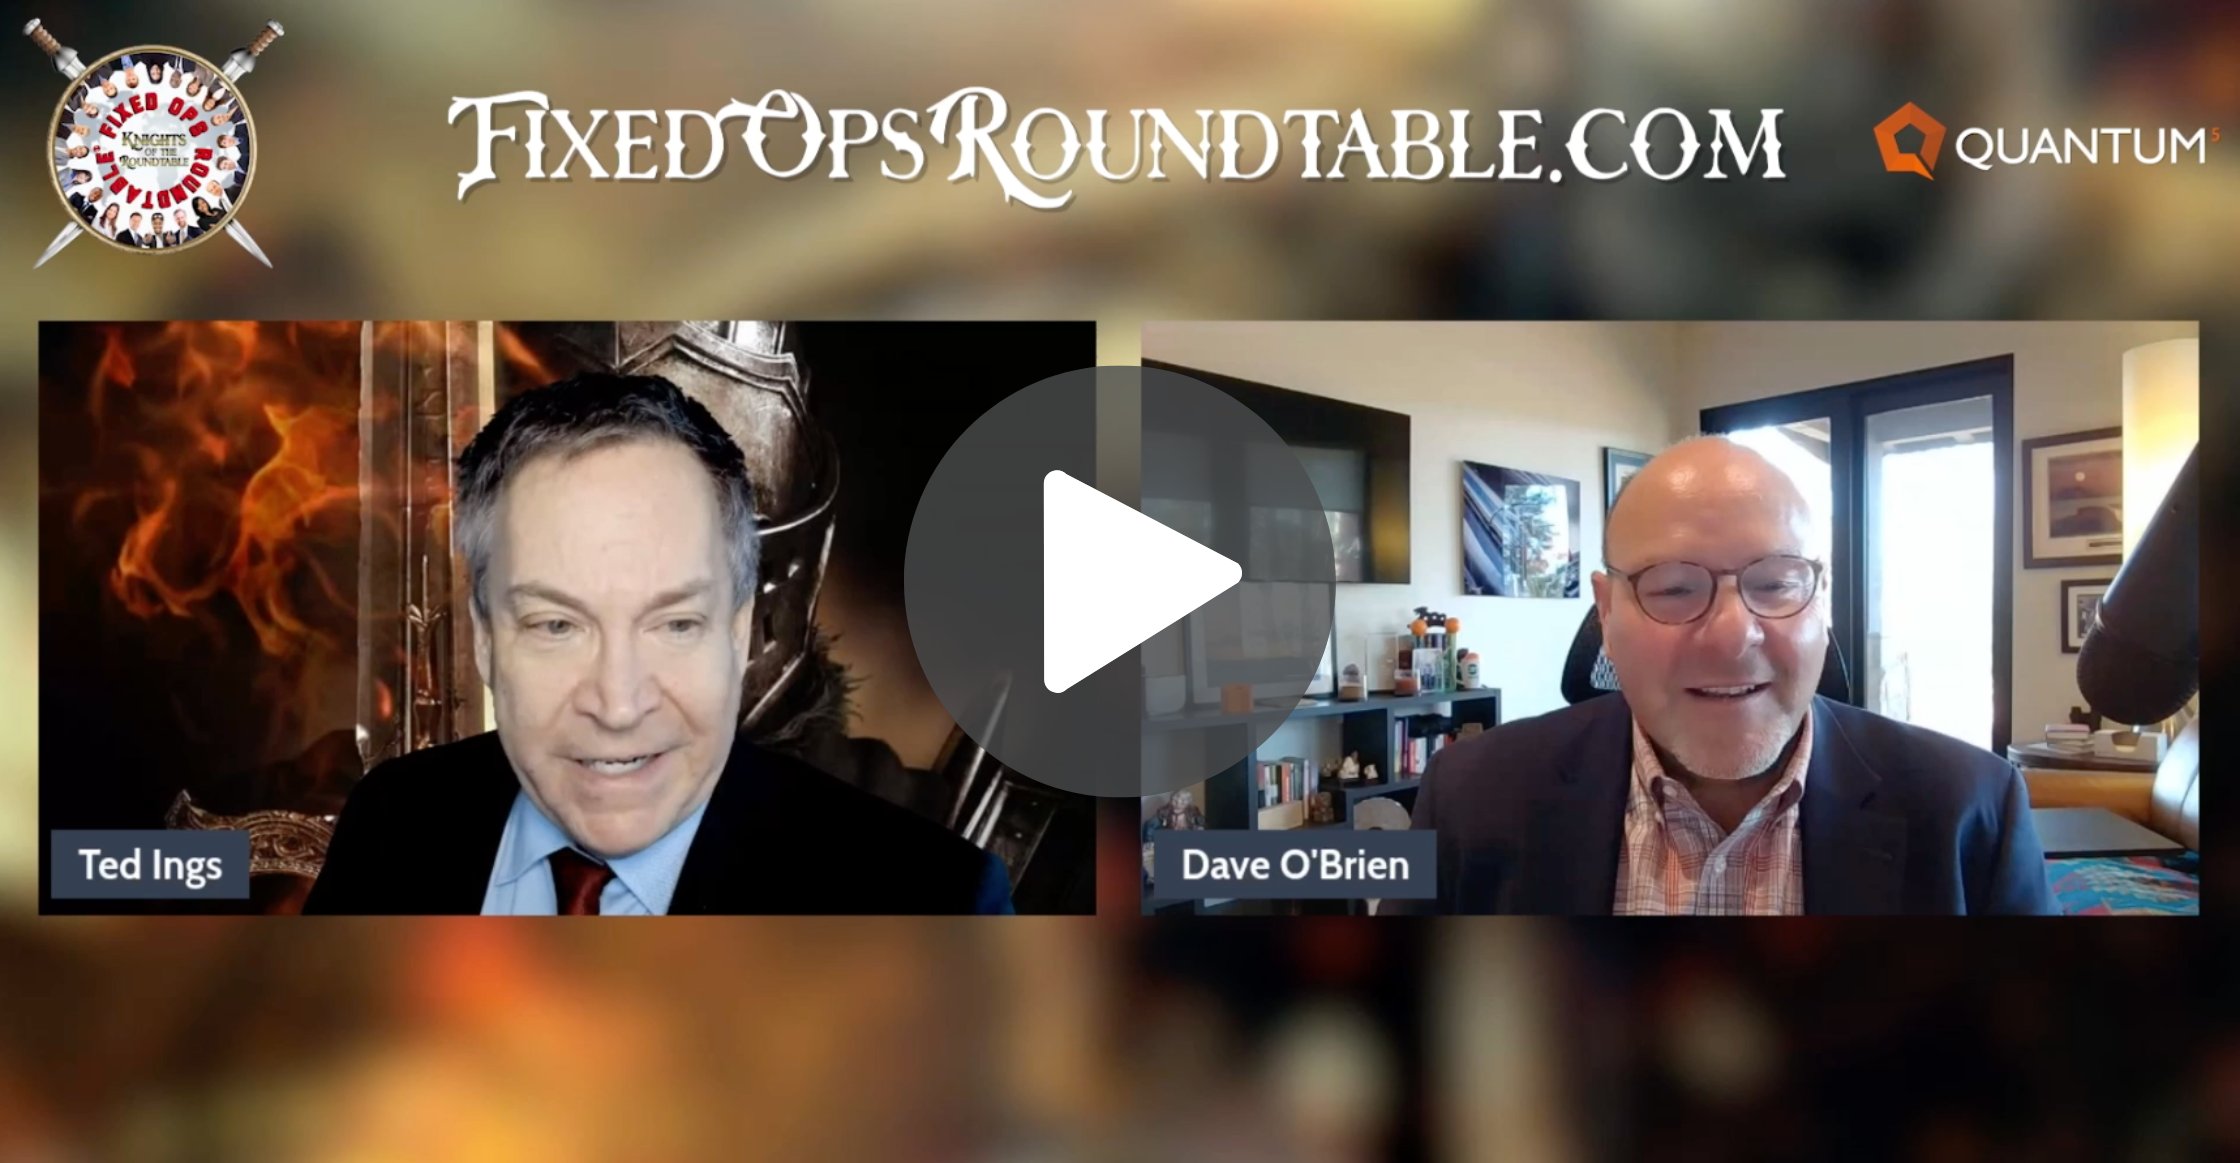 FORT Knights of the Roundtable with Dave O'Brien